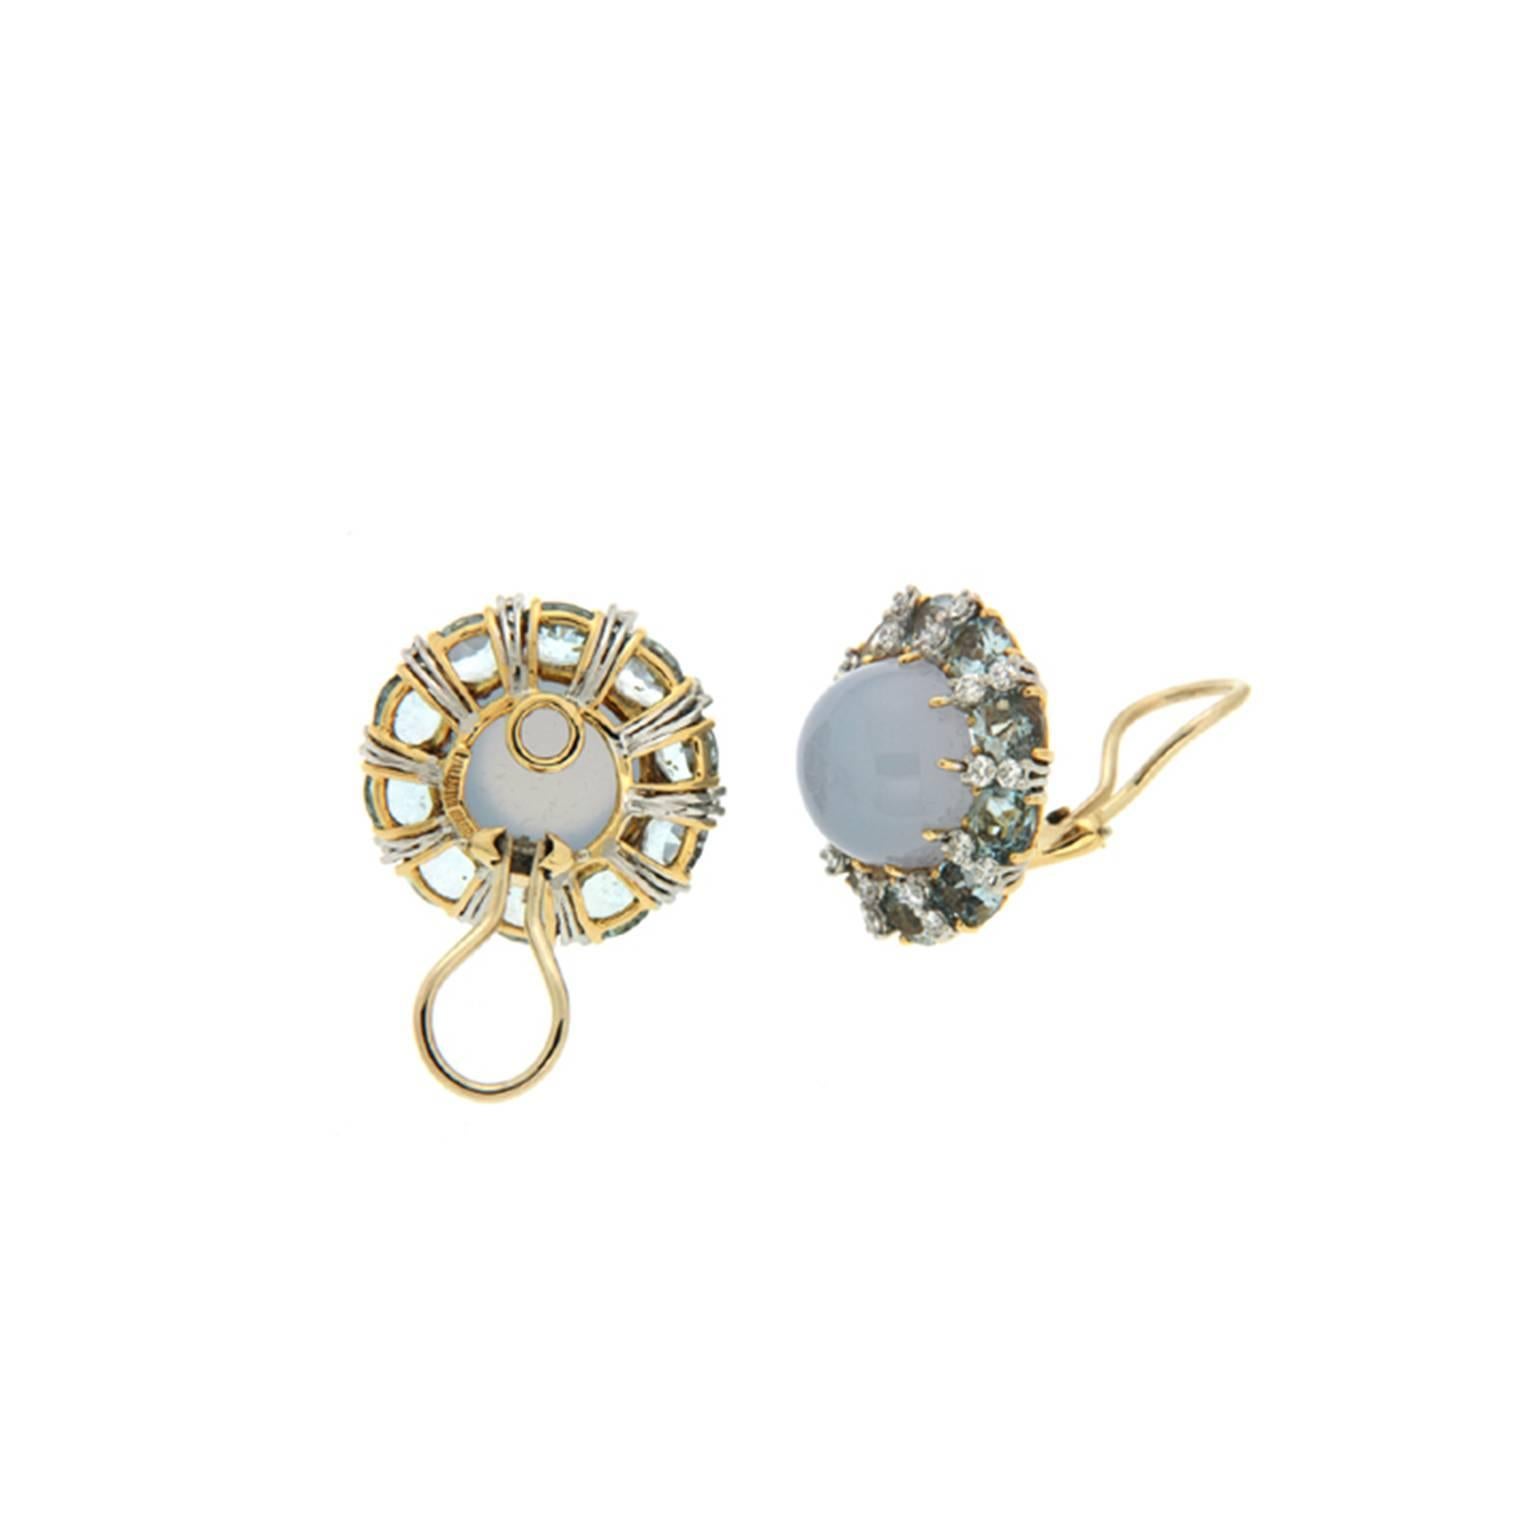 These earrings are made in 18kt yellow gold and platinum, they feature cabochon chalcedony stones in the center with 11.20 carat total weight of oval aquamarine all around, a total of forty round brilliant diamonds are set between the aquamarines